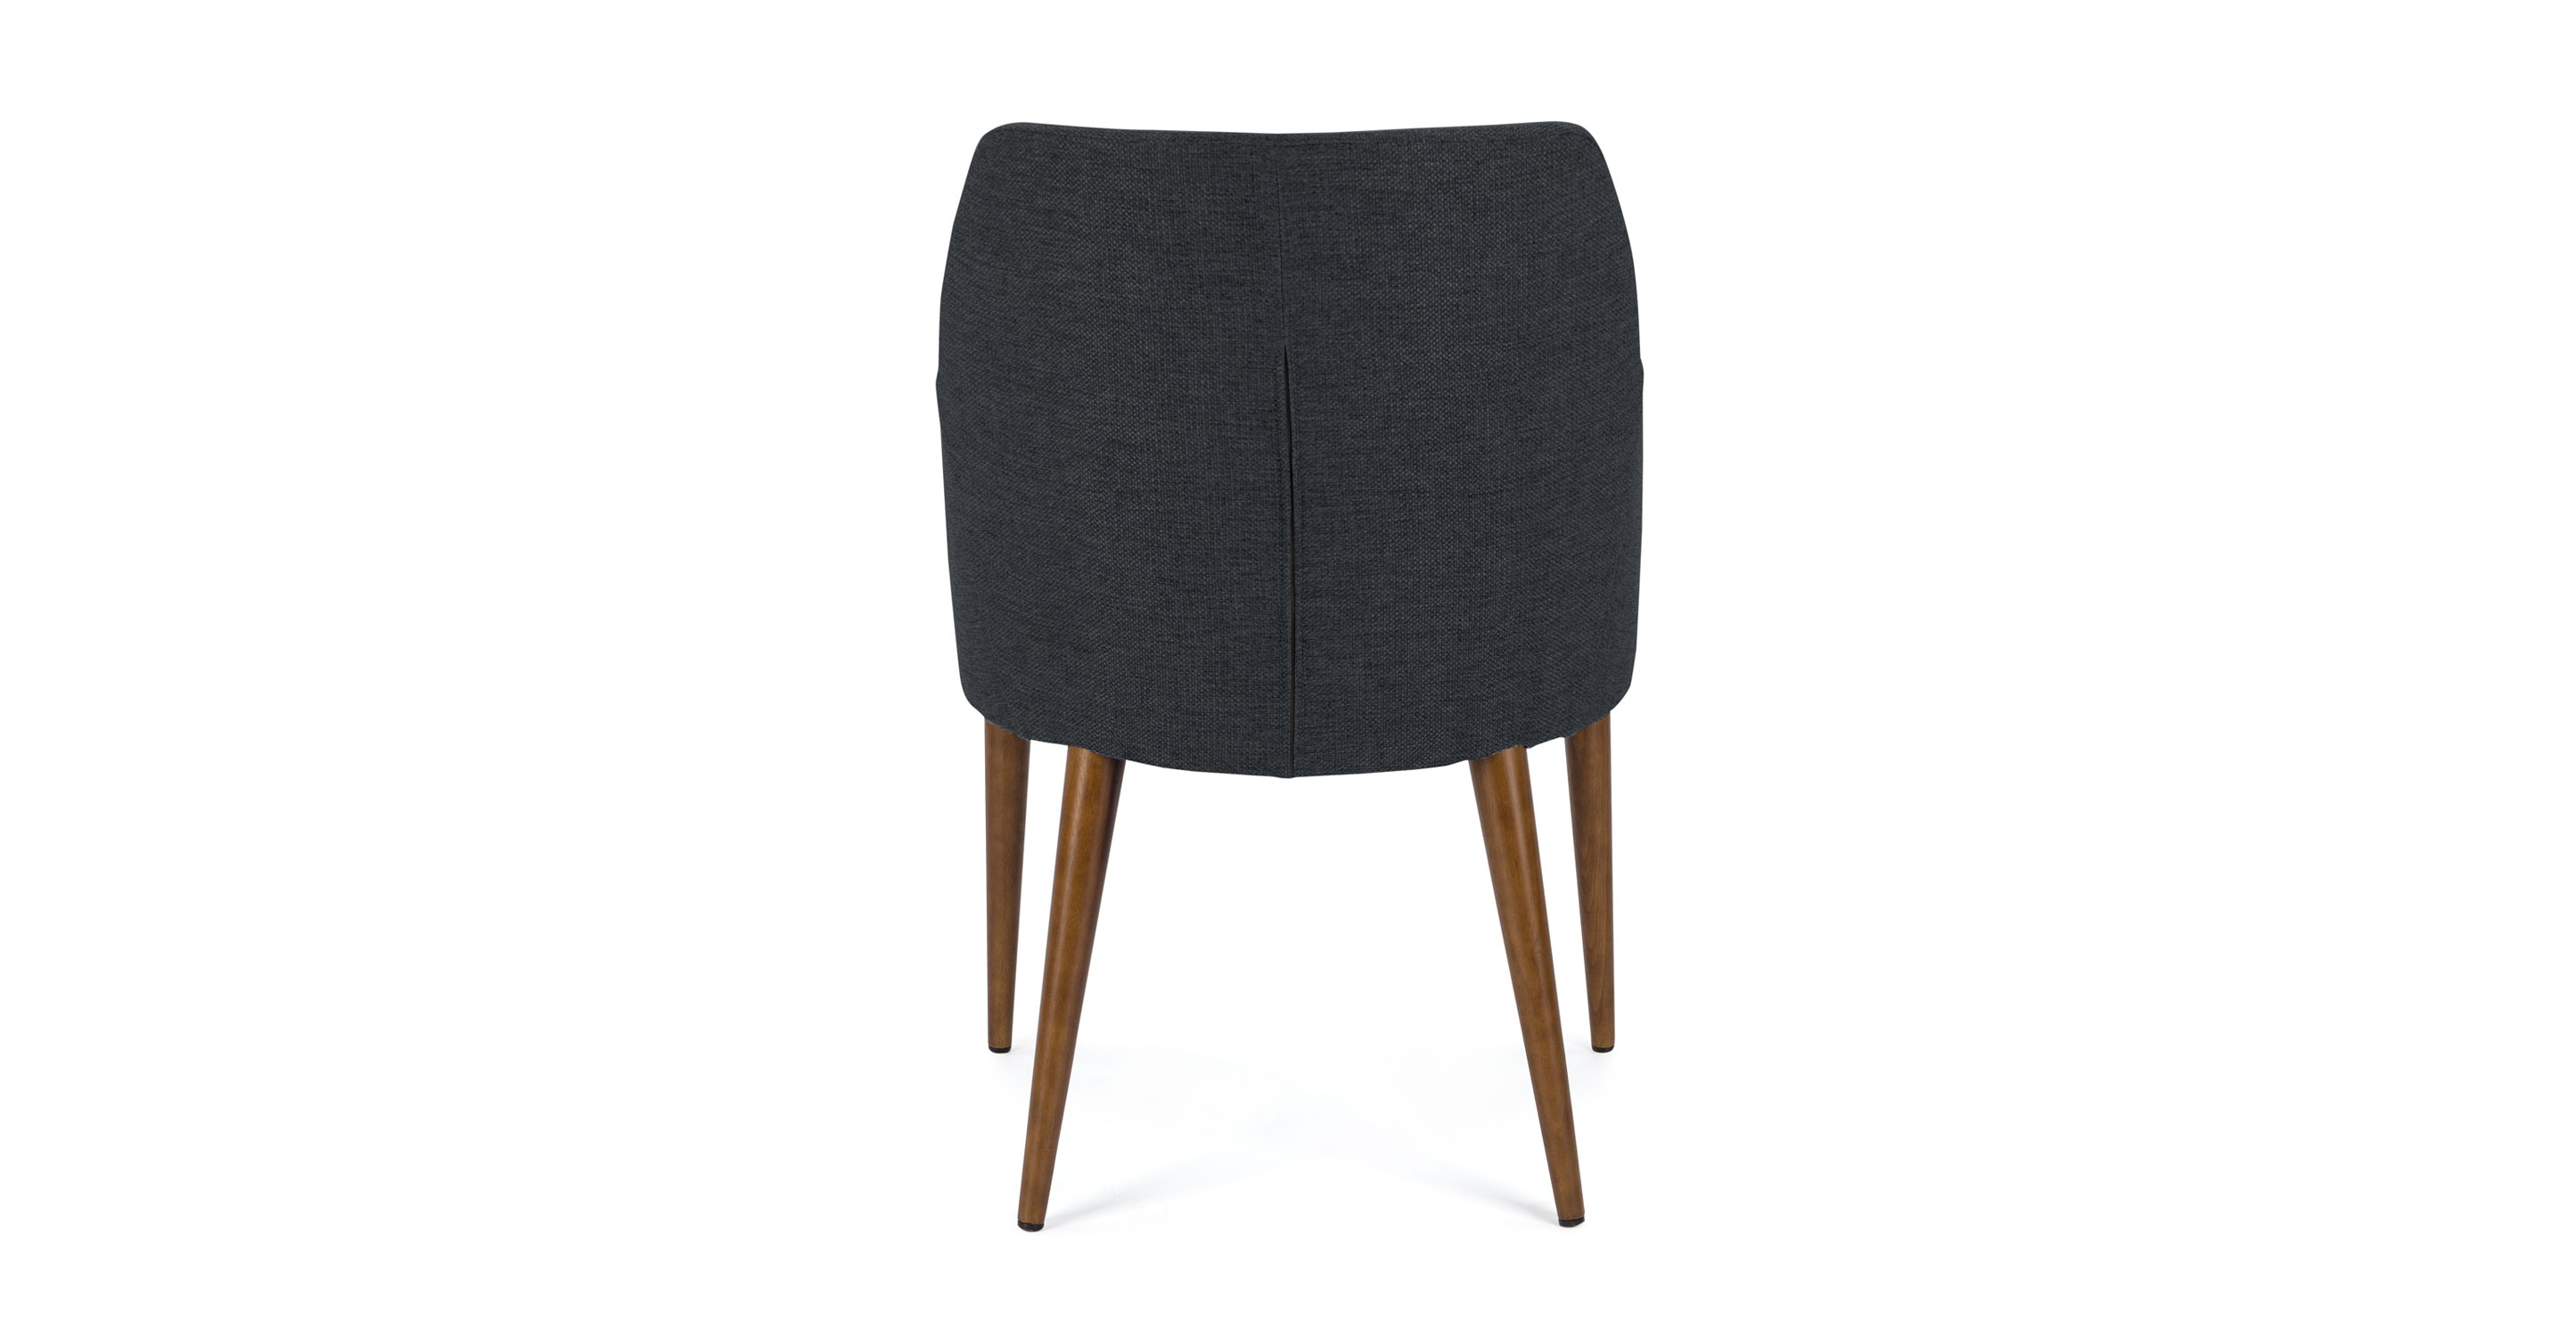 Feast Bard Gray Dining Chair - Image 3